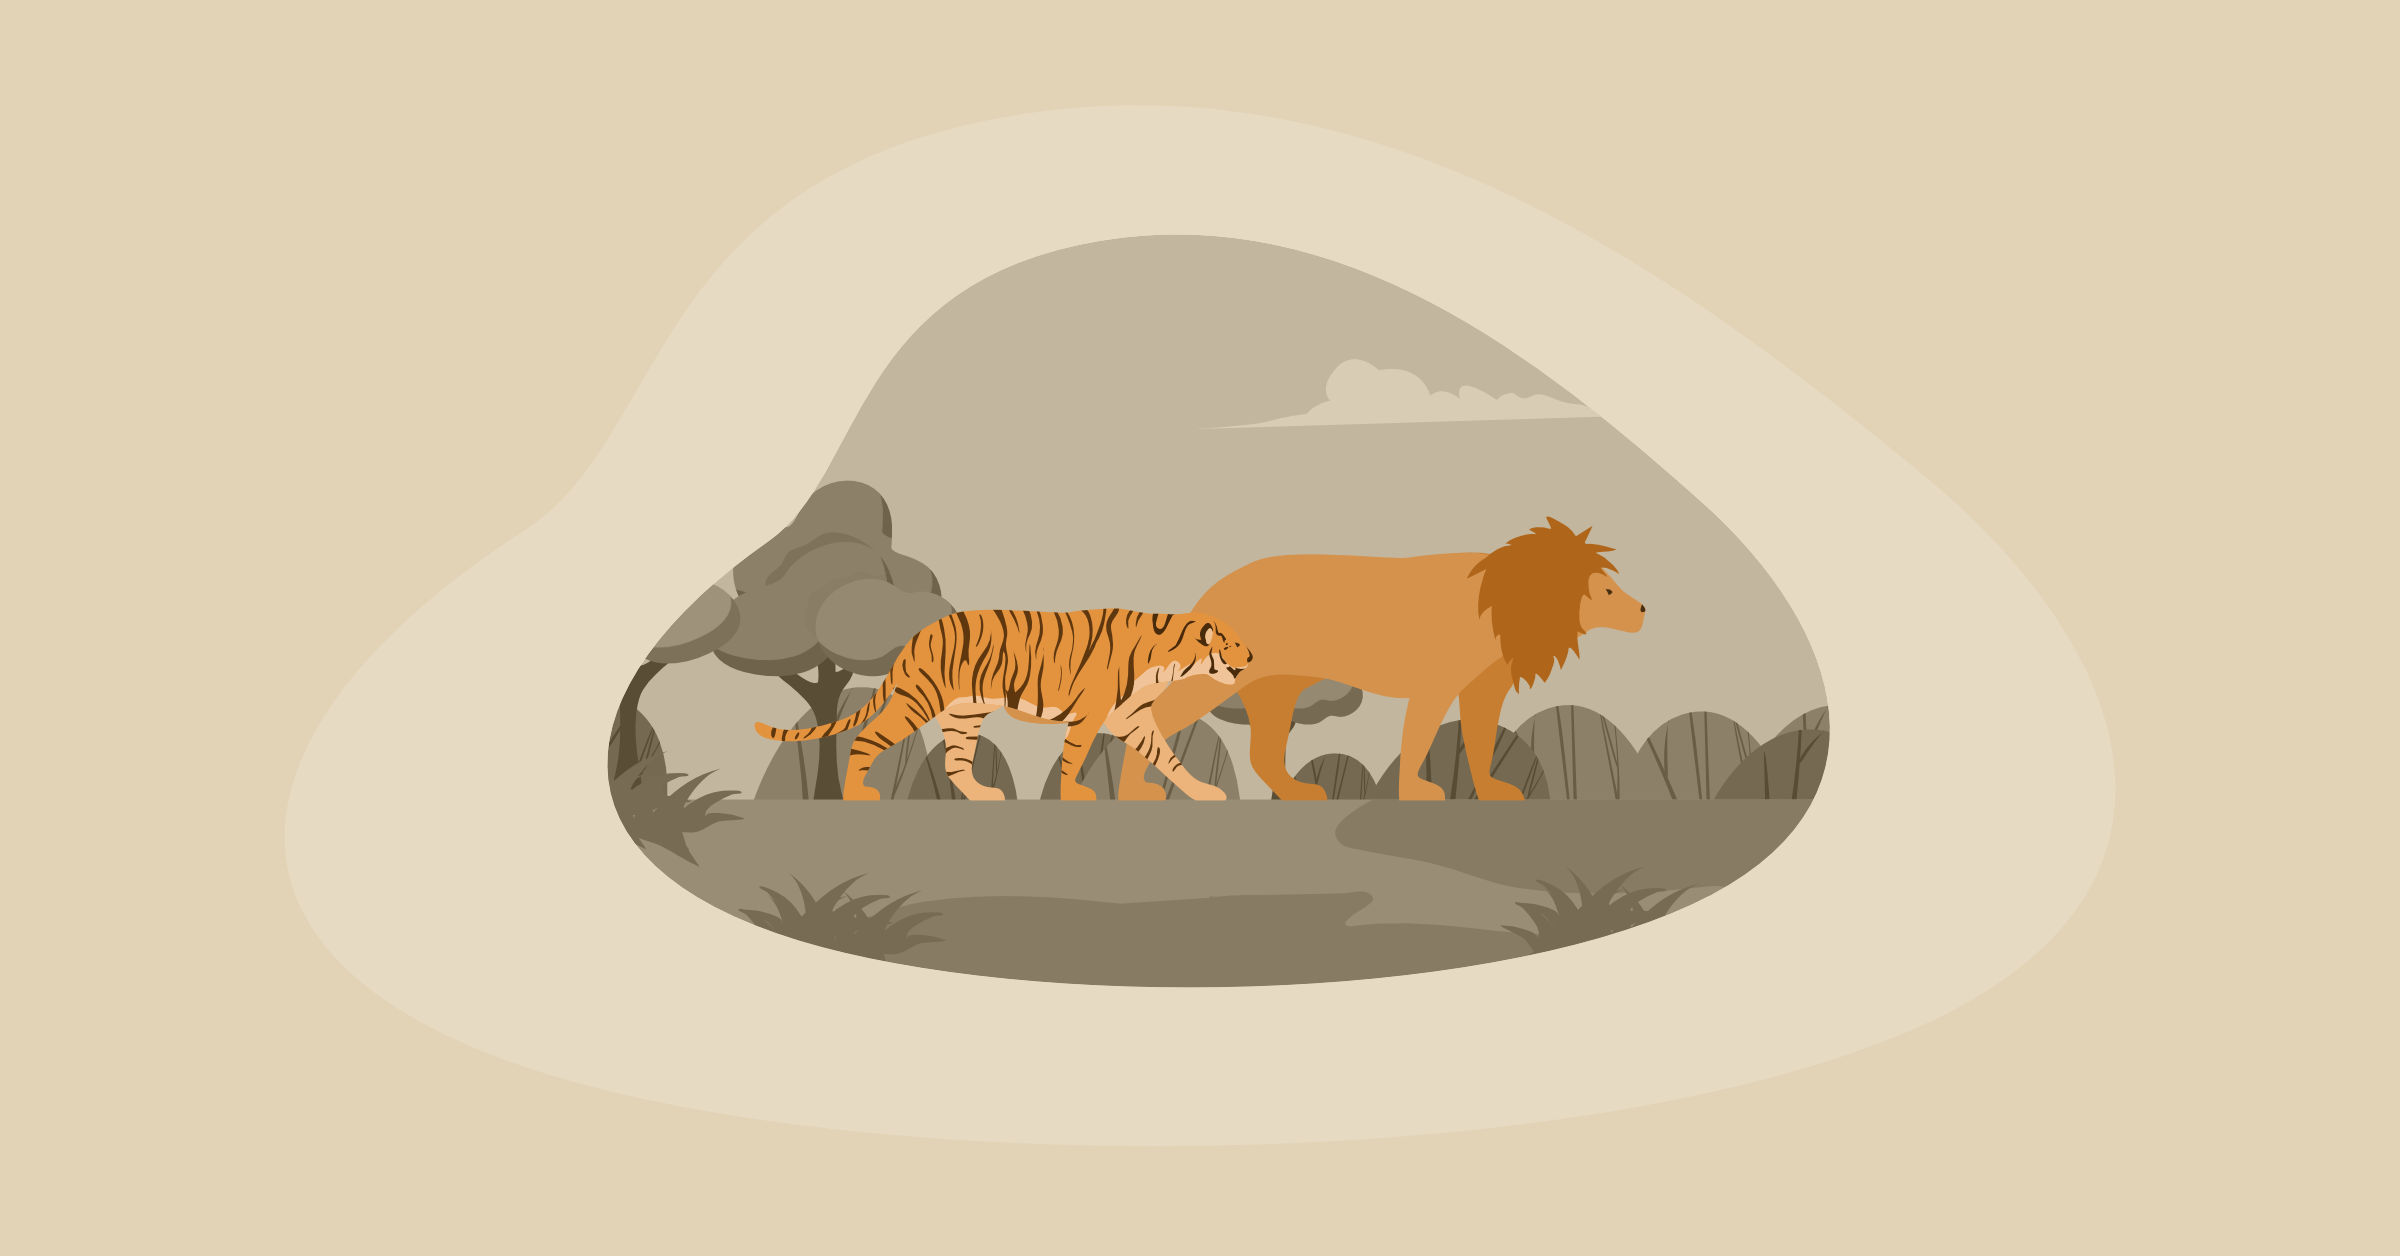 Illustration of two big cats